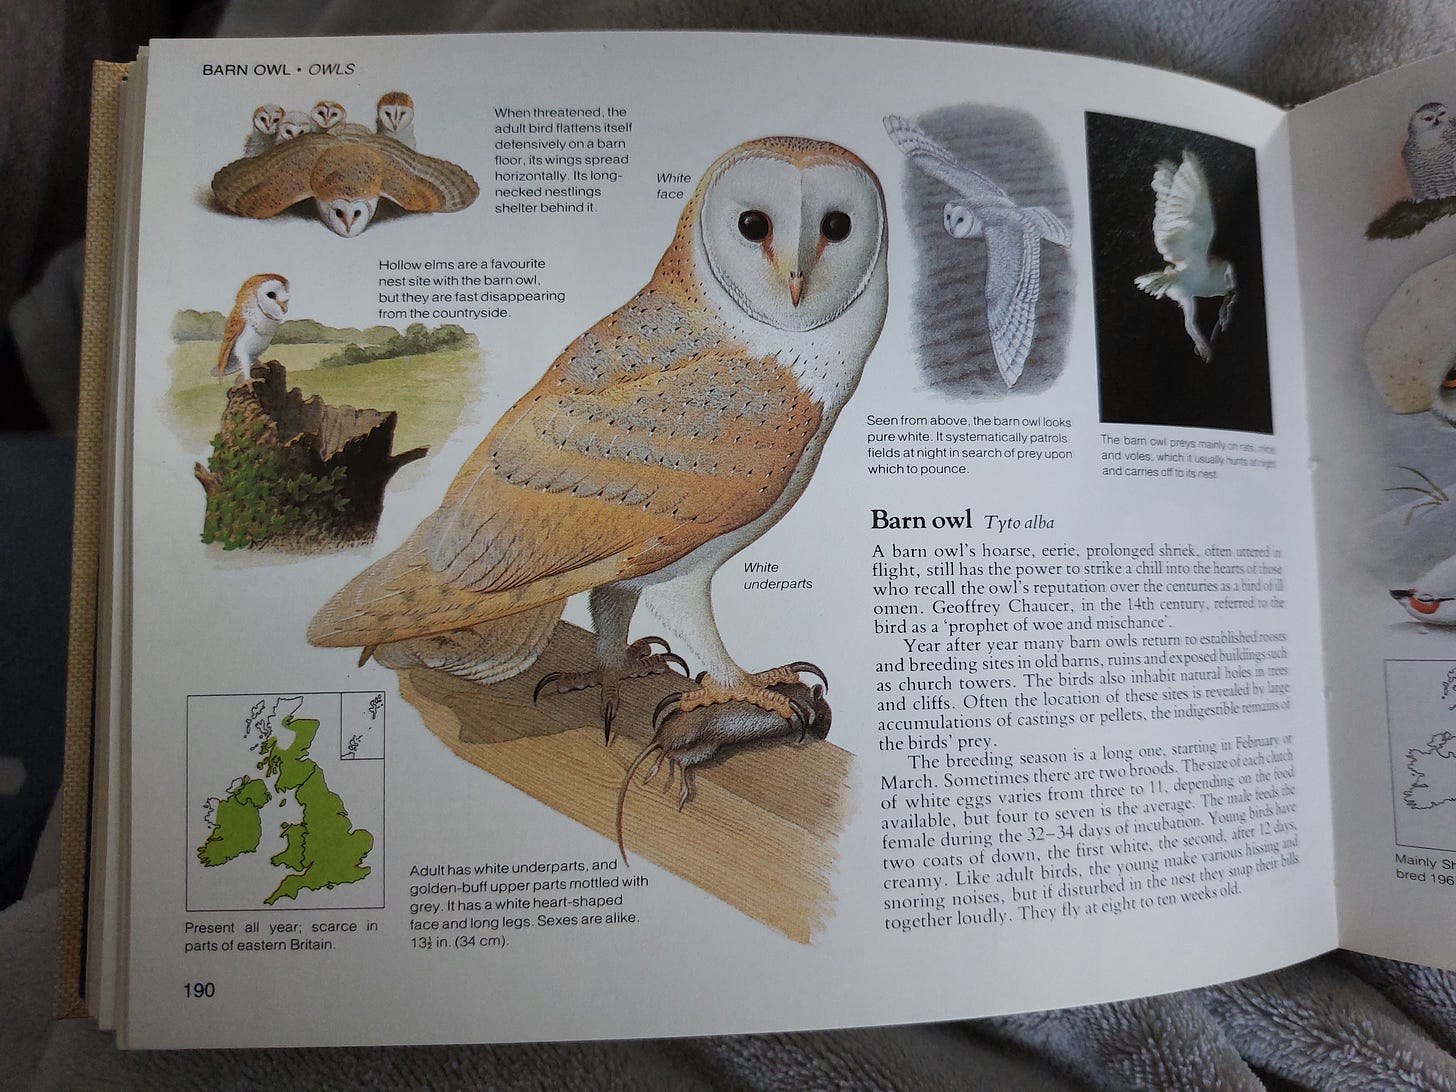 Page 190 of a Field Guide to Birds of Britain about barn owls